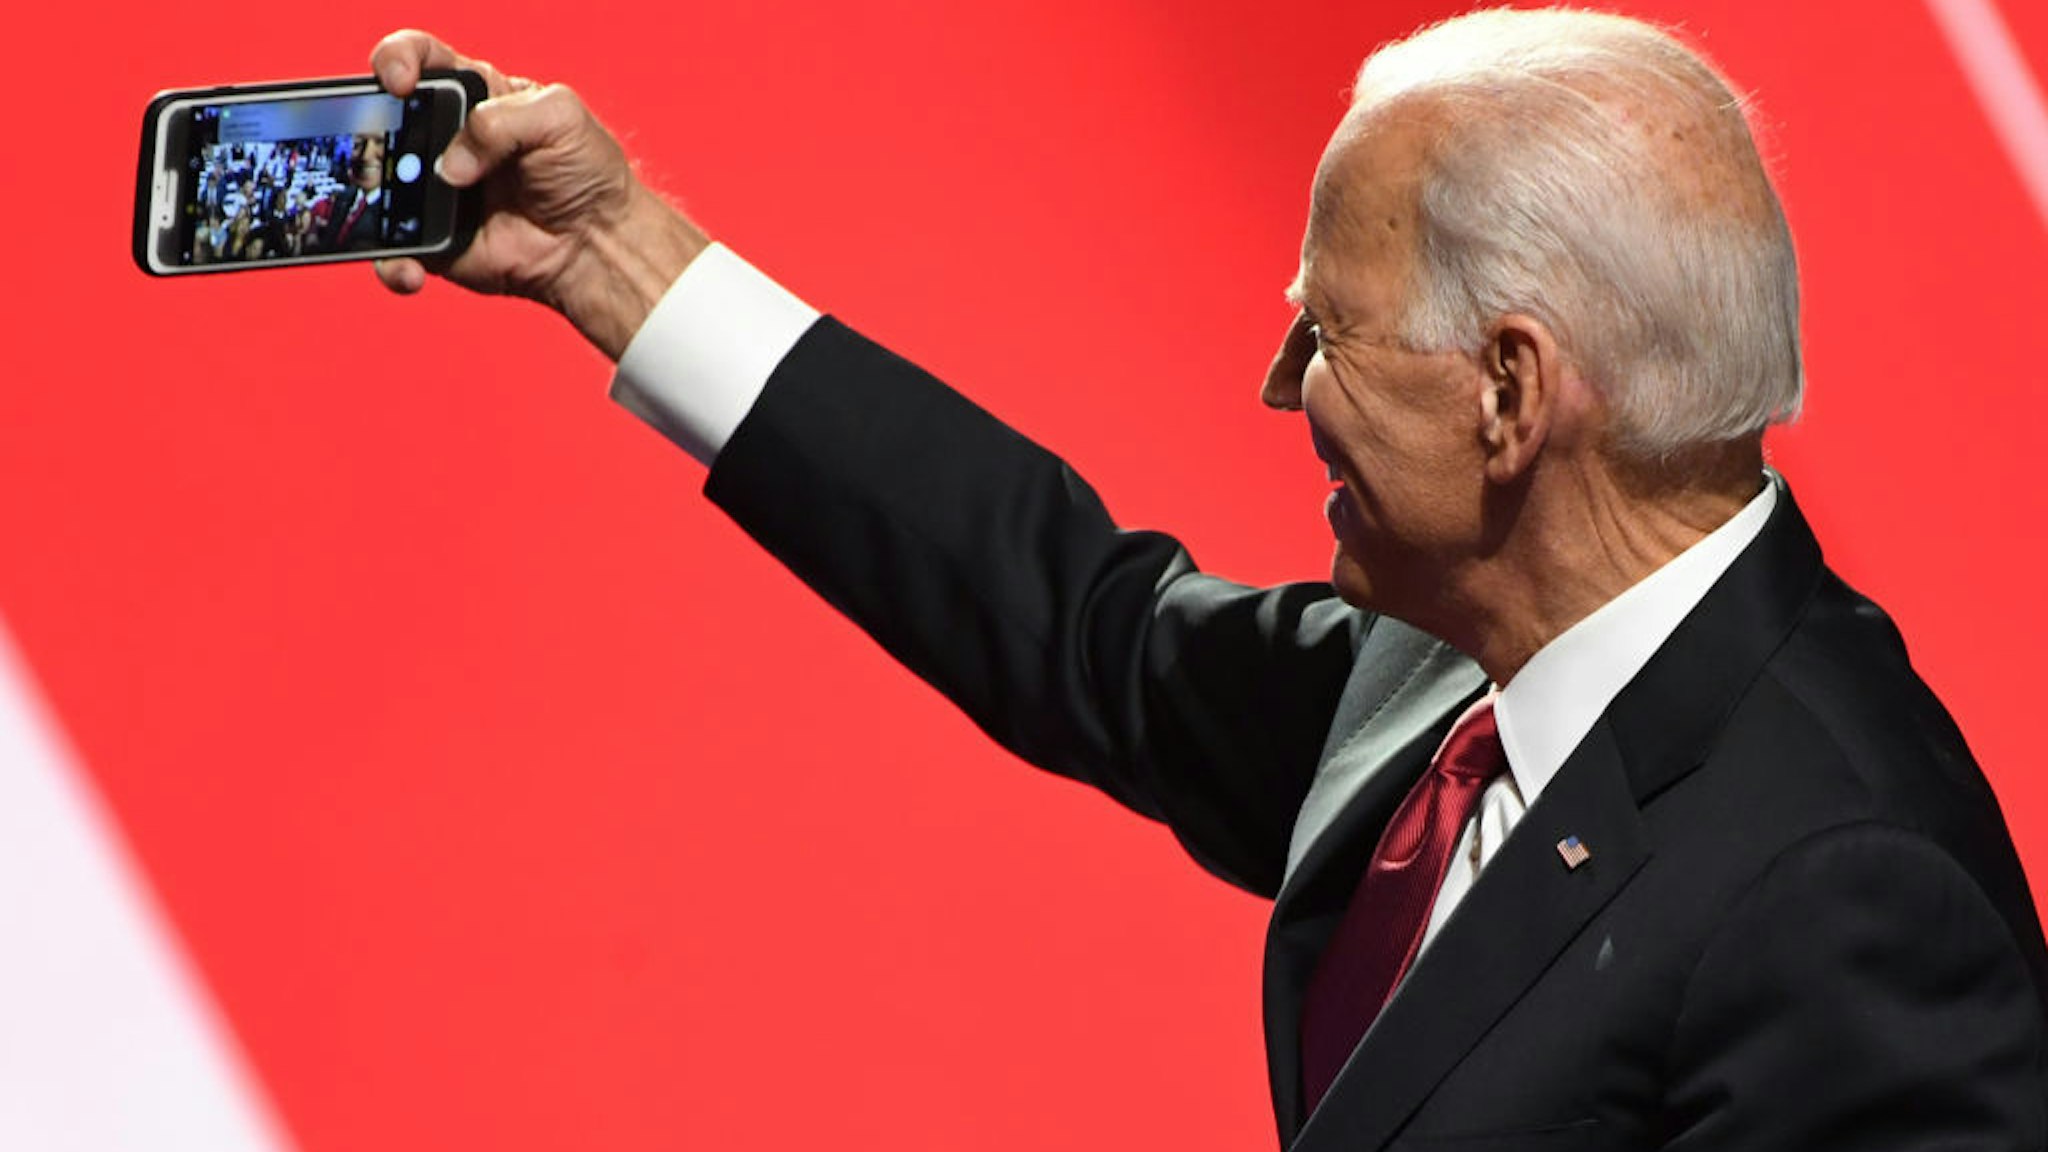 Democratic presidential hopeful former US Vice President Joe Biden takes a selfie with supporters after the fourth Democratic primary debate of the 2020 presidential campaign season co-hosted by The New York Times and CNN at Otterbein University in Westerville, Ohio on October 15, 2019. (Photo by SAUL LOEB / AFP) (Photo by SAUL LOEB/AFP via Getty Images)